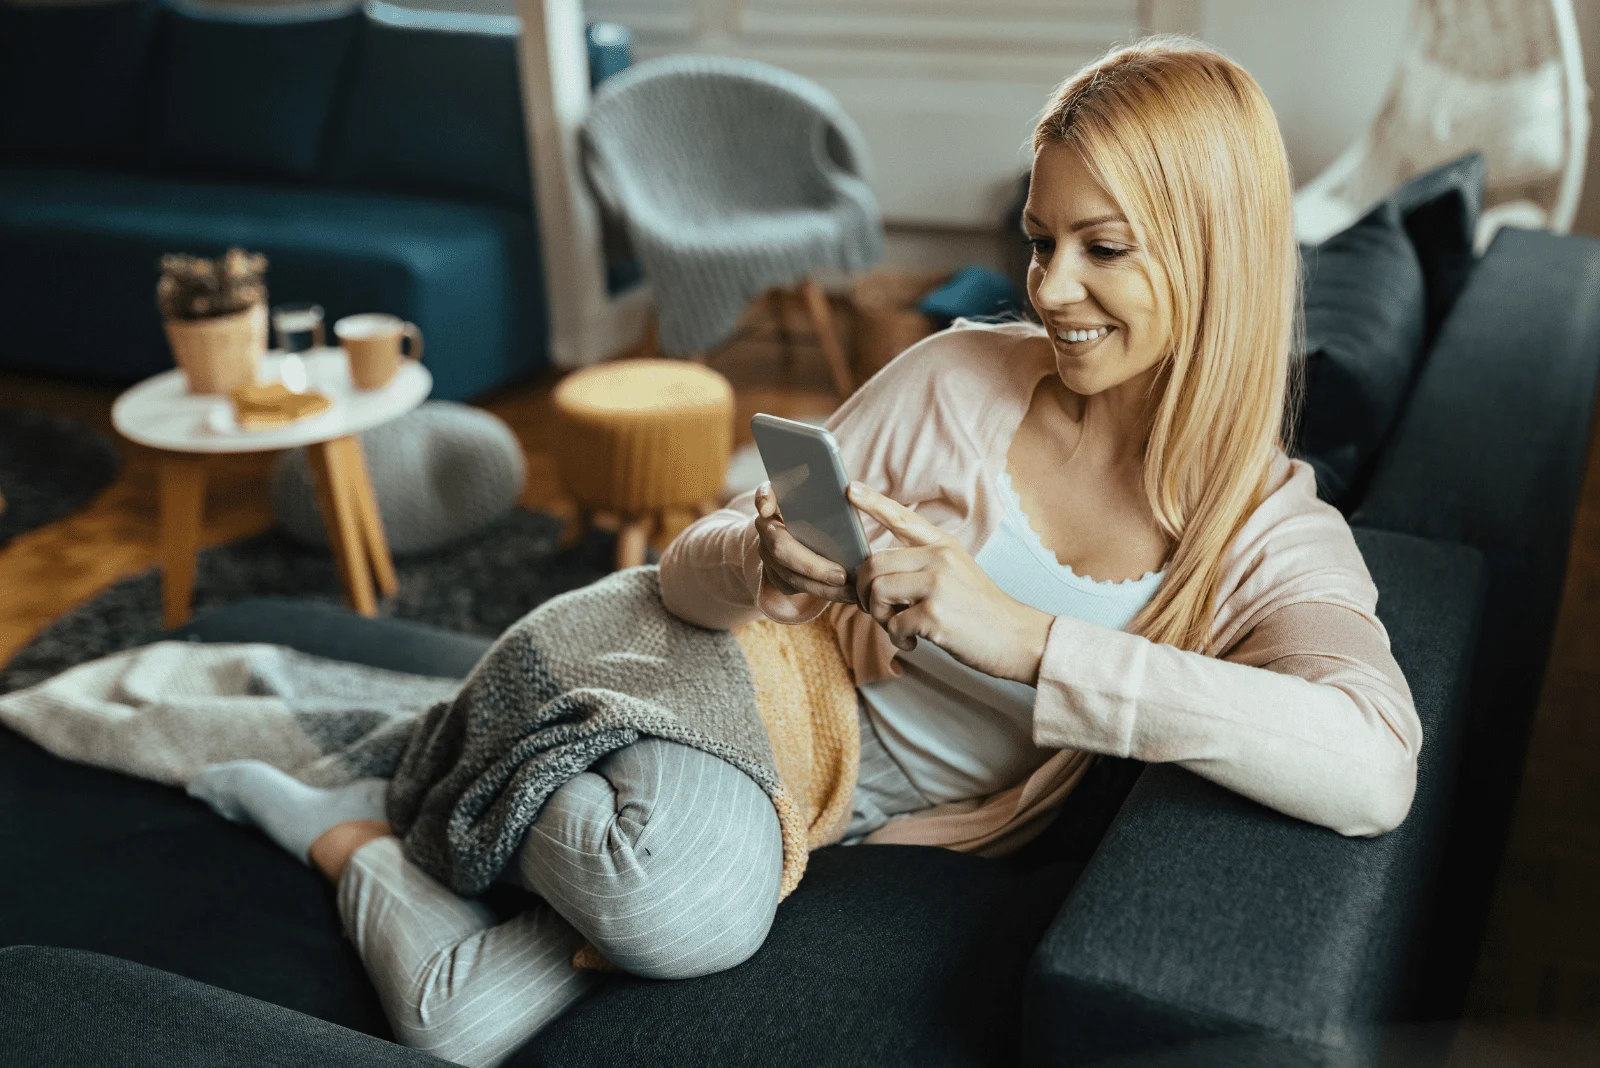 a beautiful woman with long blonde hair leaning on the couch and typing on the phone